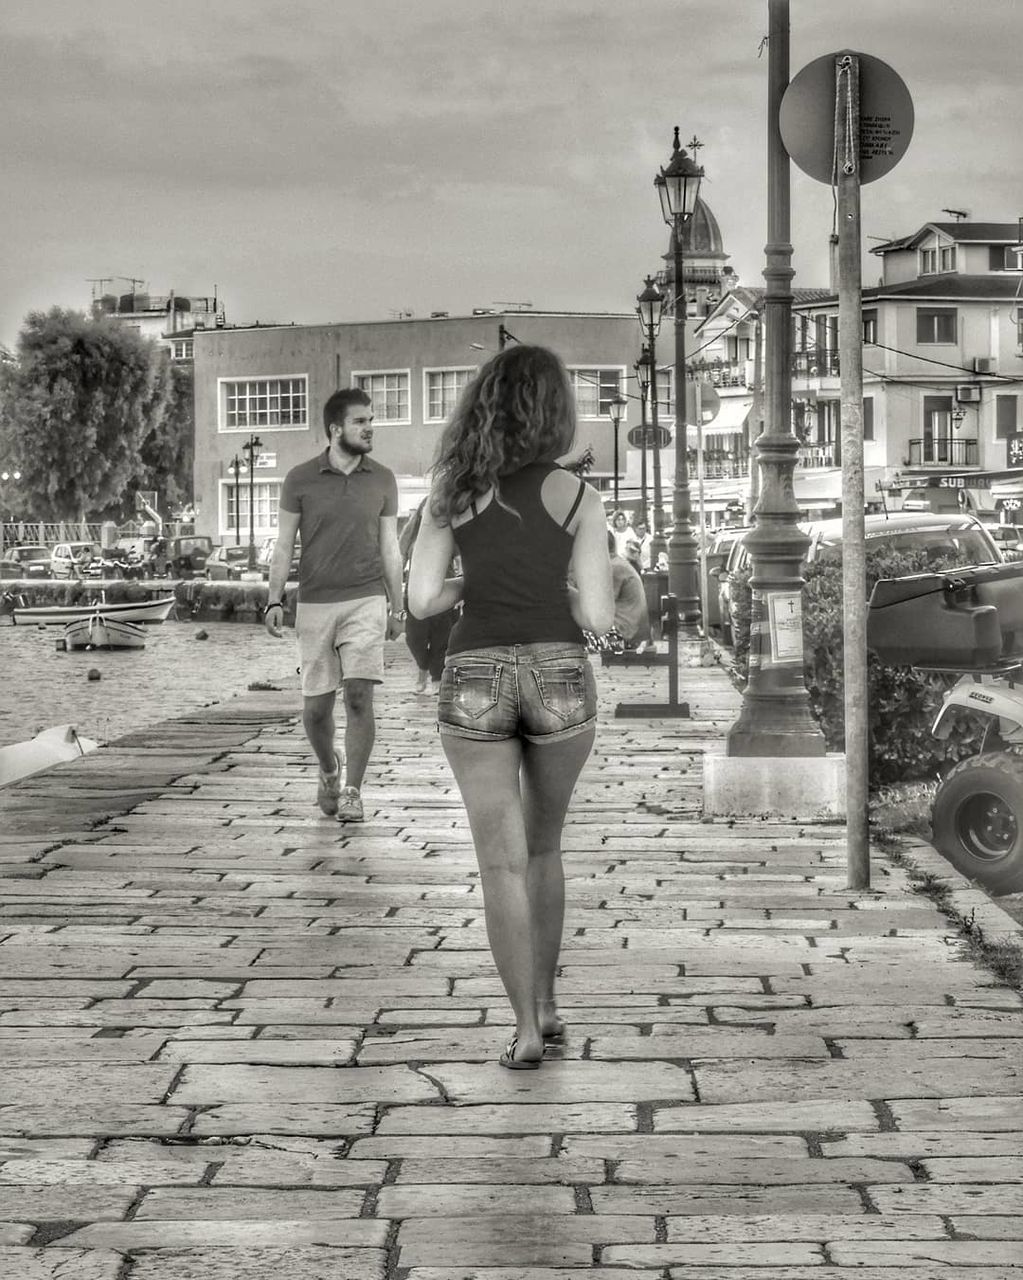 full length, real people, architecture, building exterior, rear view, women, built structure, lifestyles, two people, adult, young women, walking, young adult, city, togetherness, people, day, leisure activity, standing, street, outdoors, hairstyle, shorts